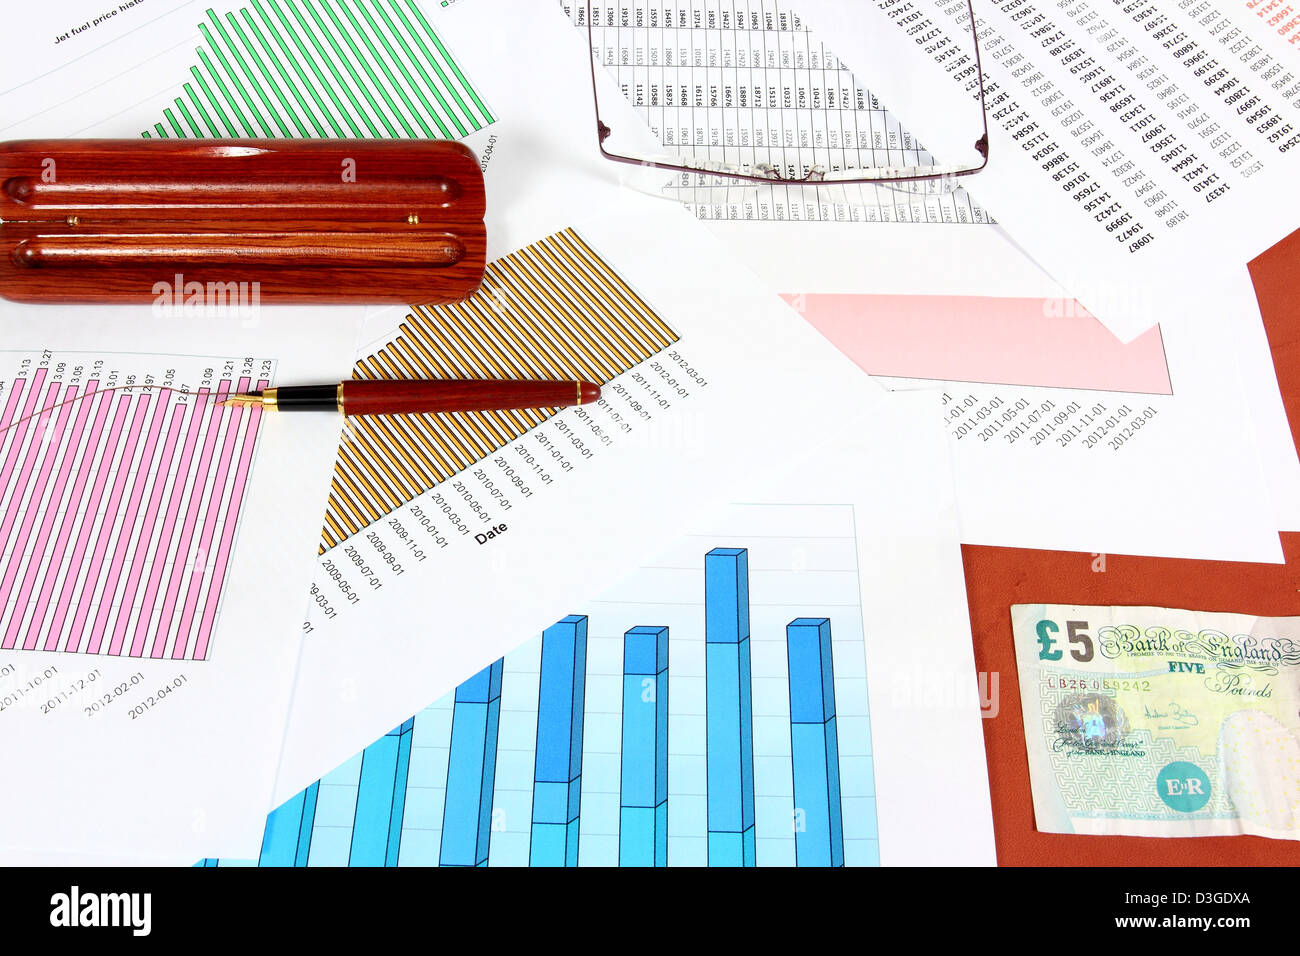 Business objects - fuel price charts, British pounds, ink pen and glasses. Financial concept. Stock Photo